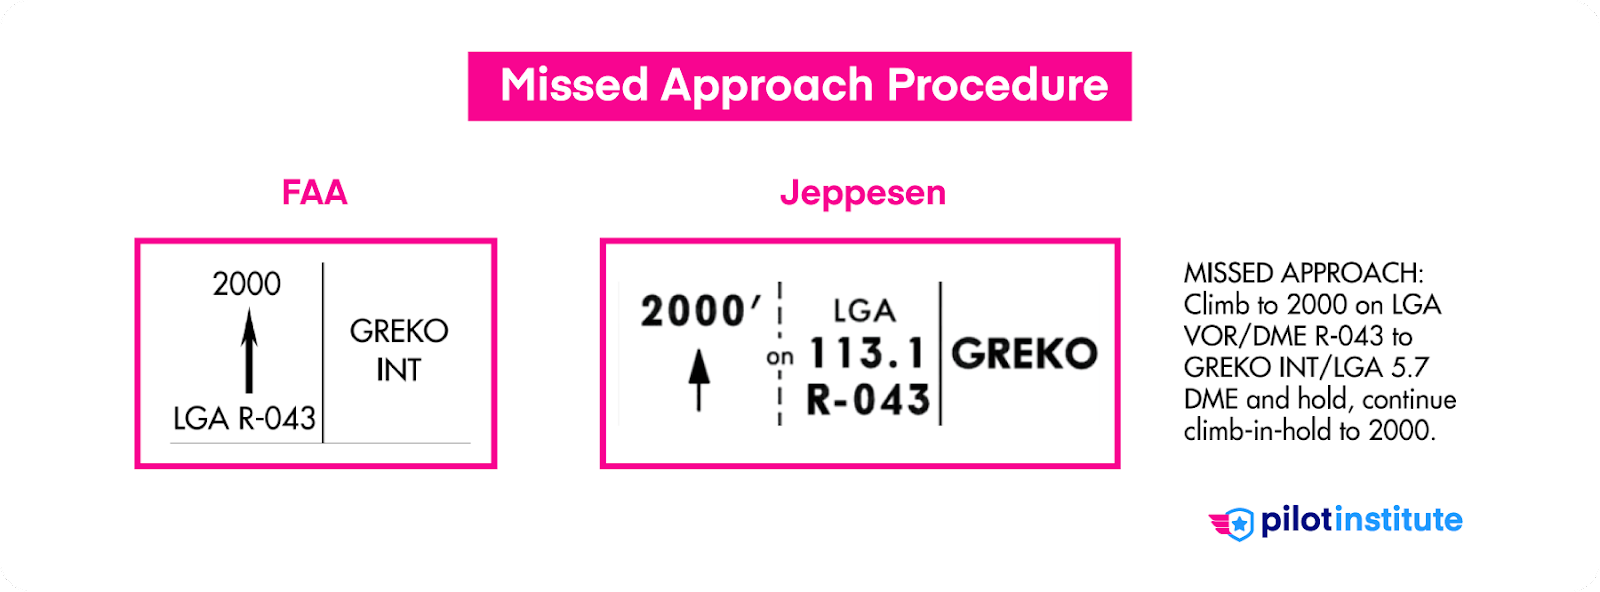 Missed approach procedure for FAA and Jeppesen charts.